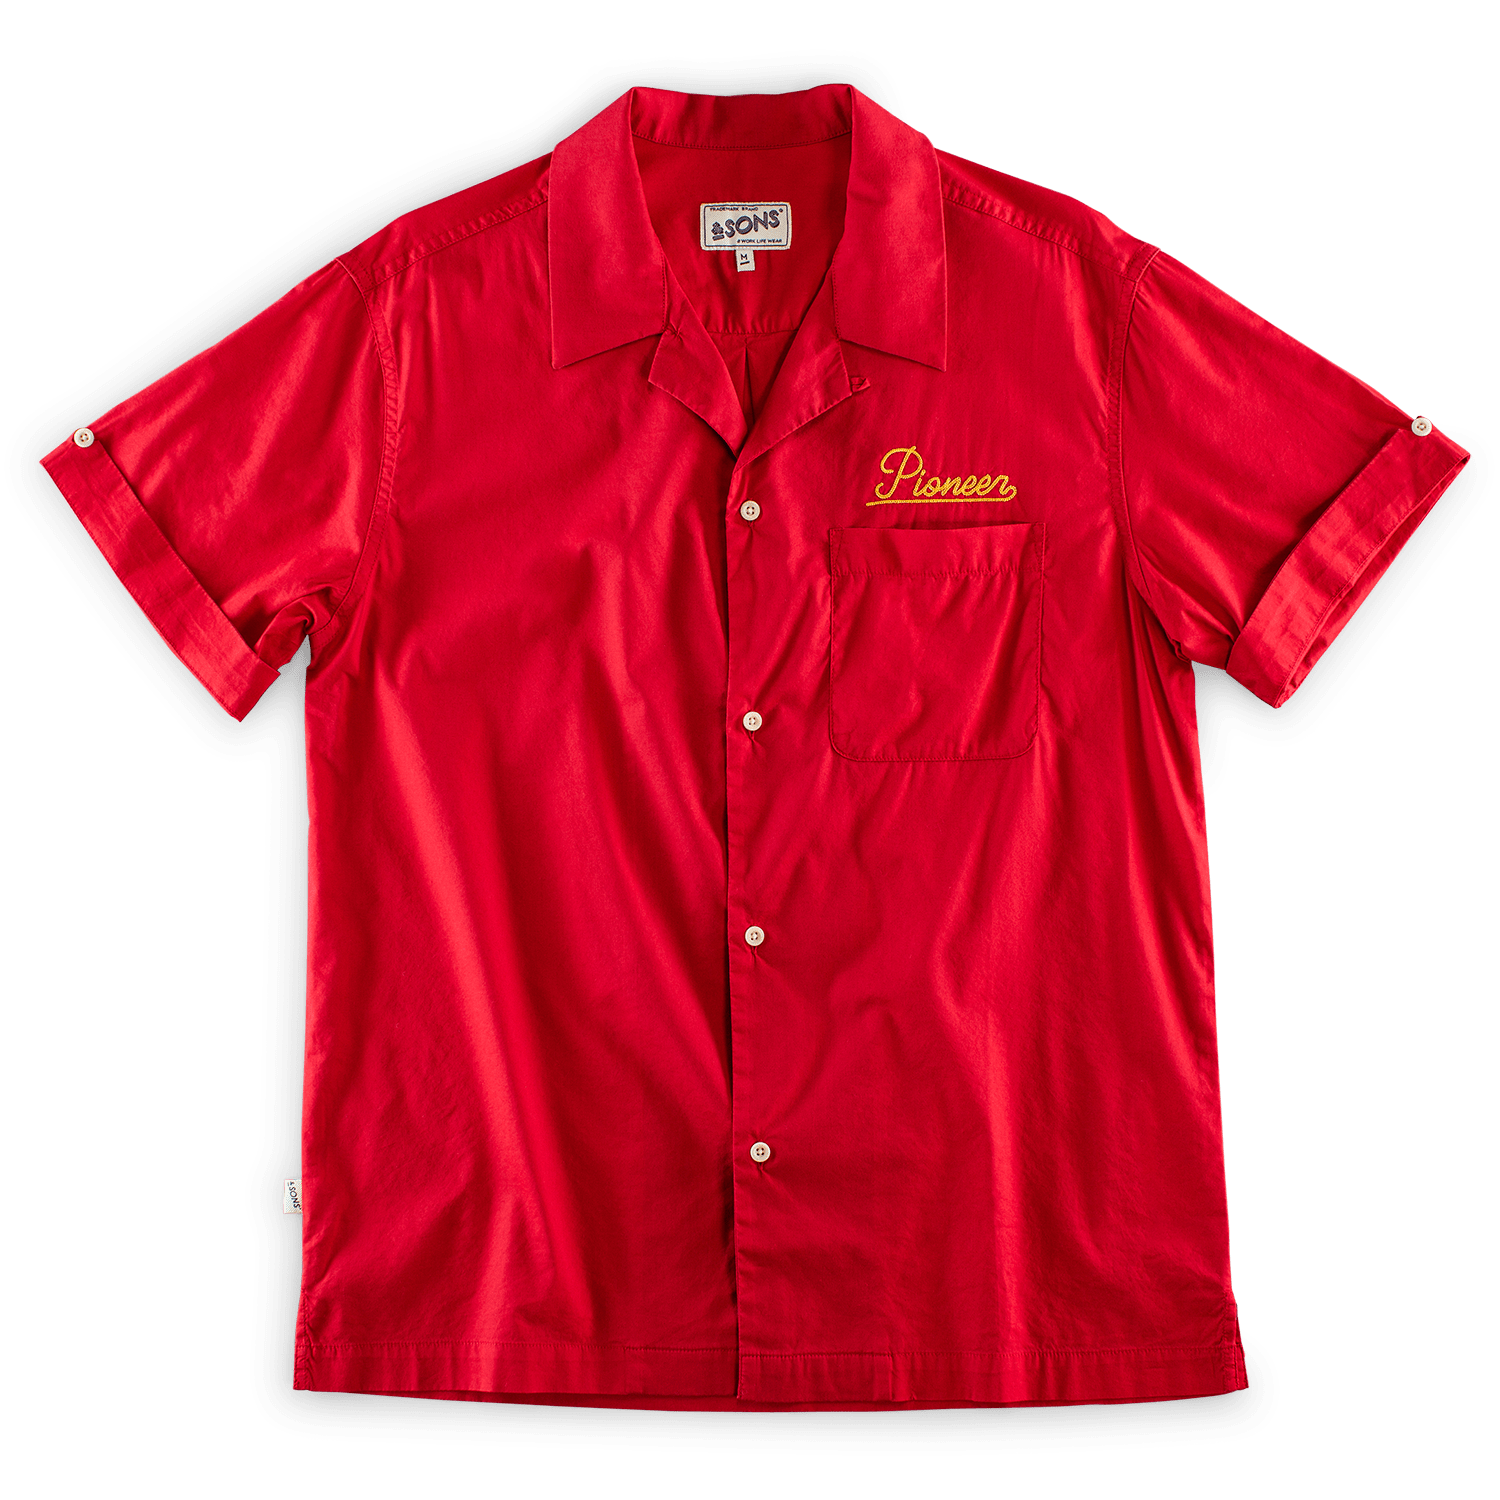 Men's Club Shirt Red Small &SONS Trading Co